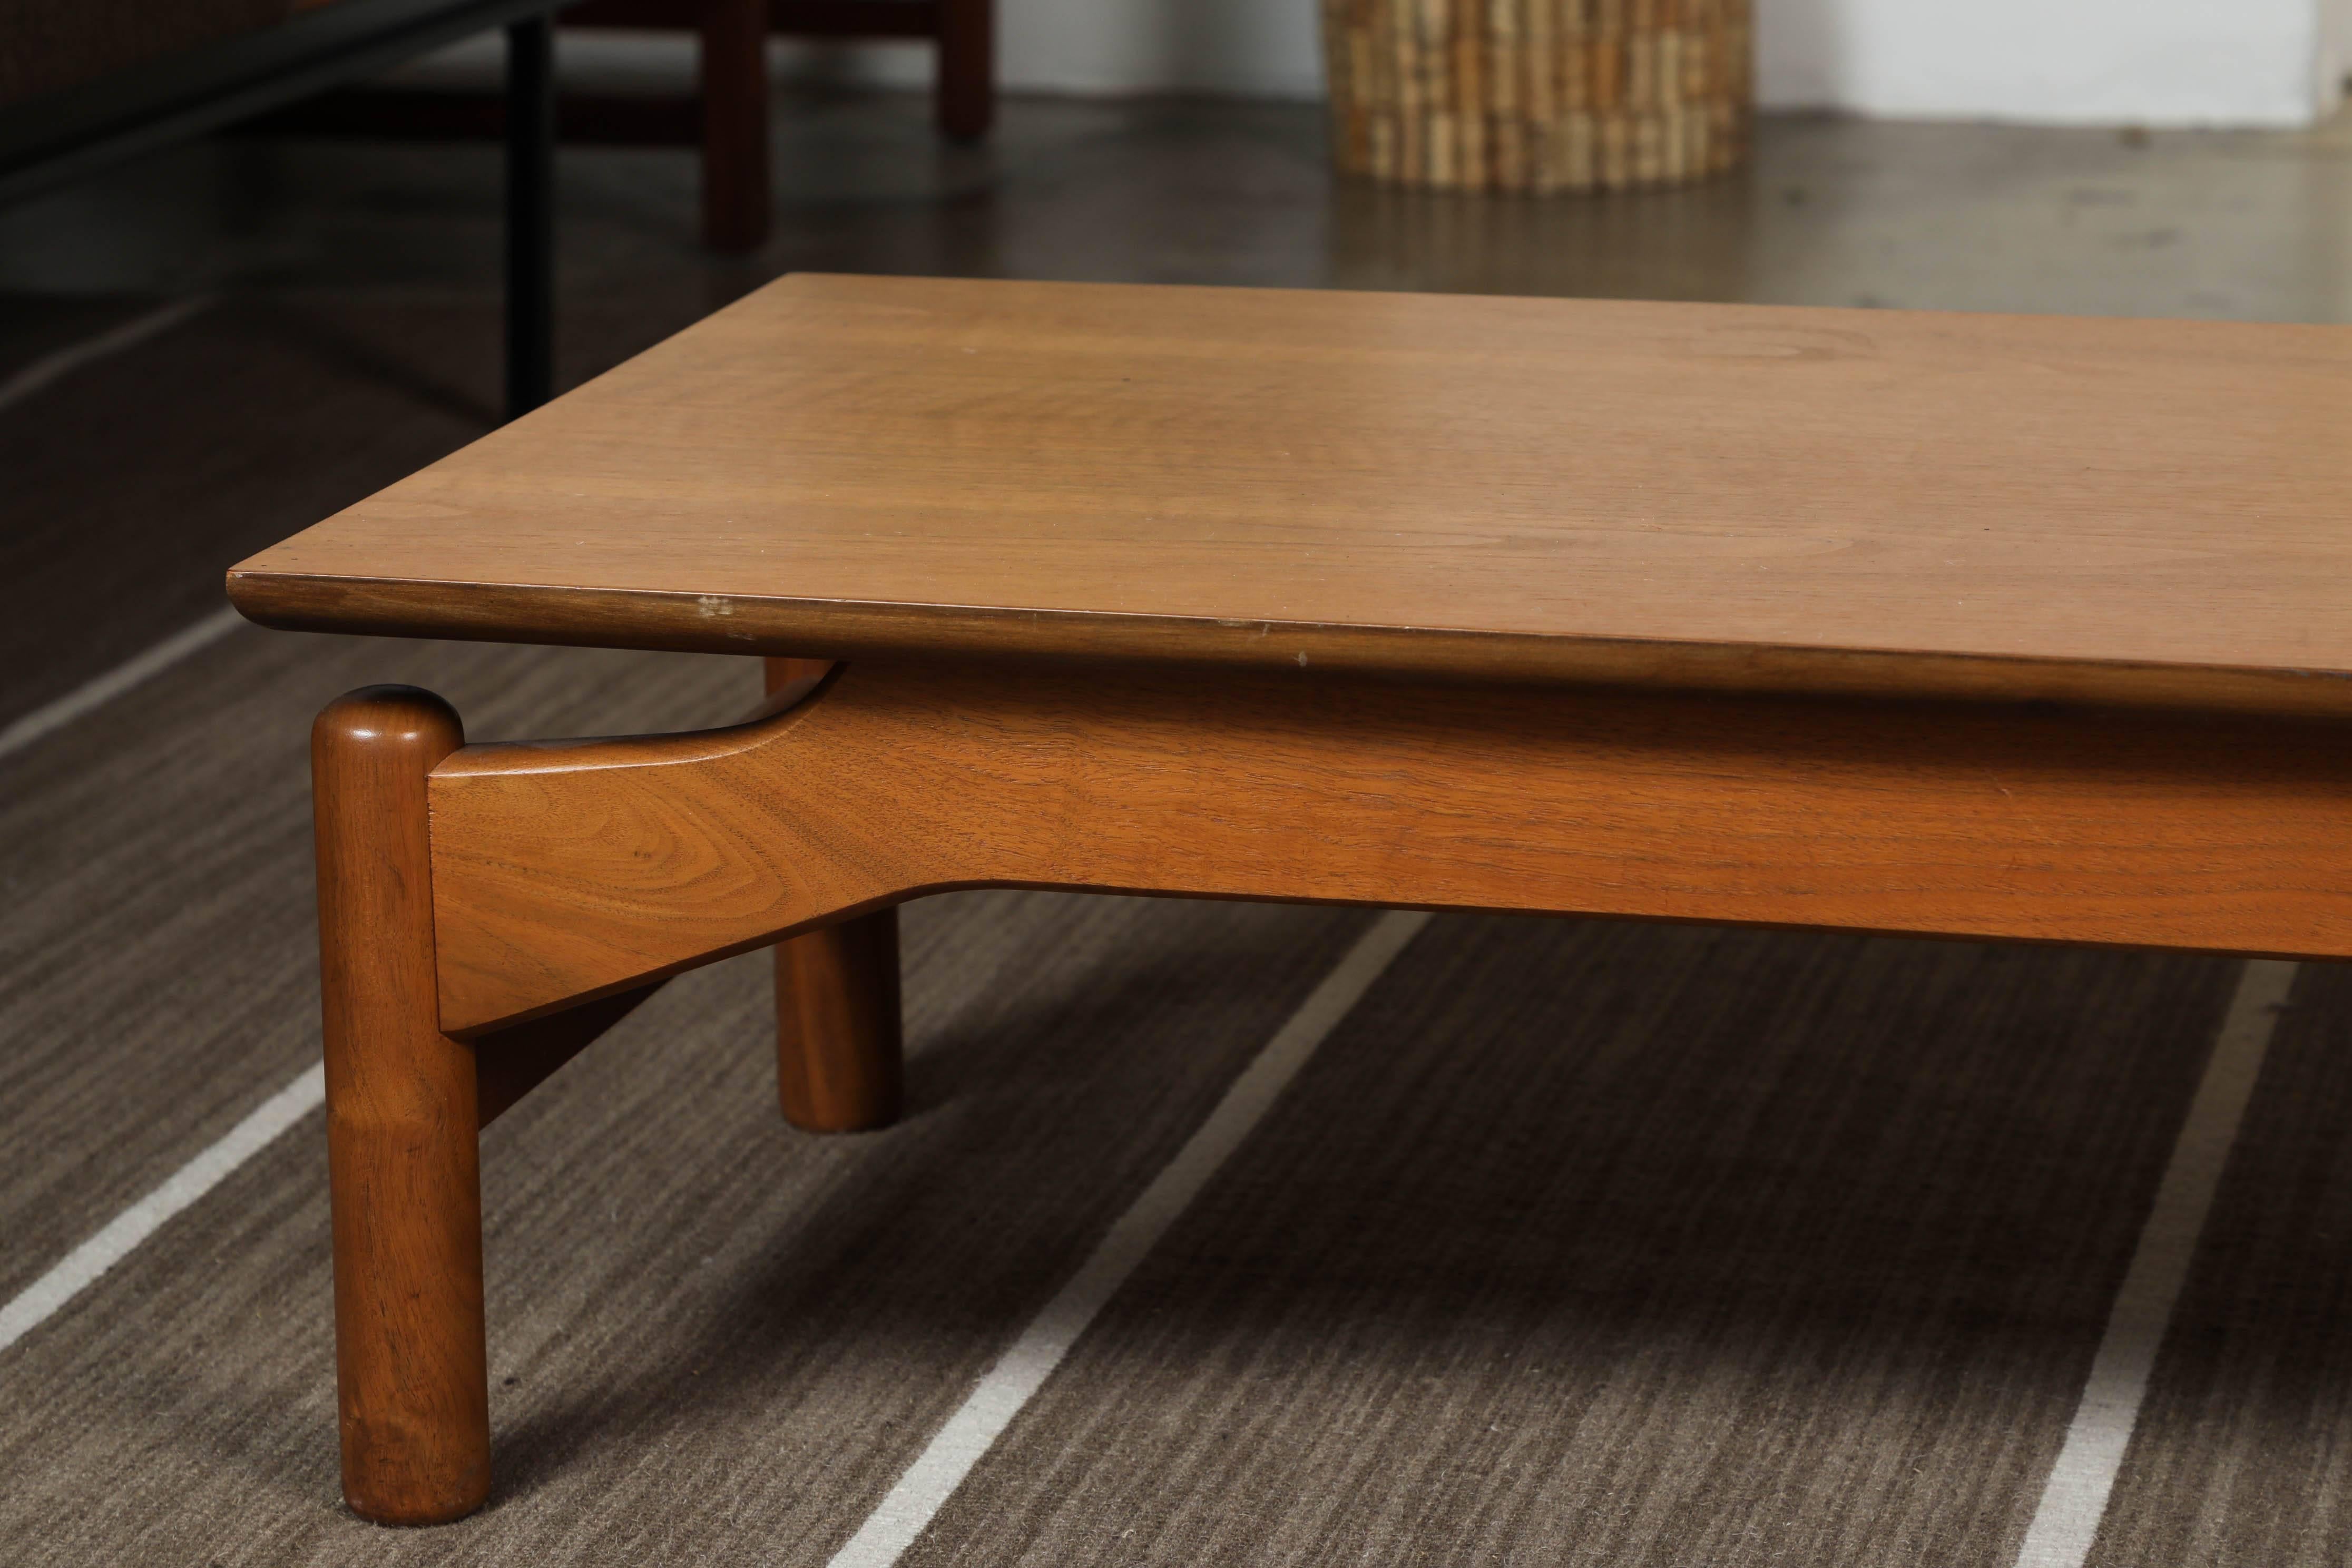 Wooden console bench by Greta Grossman.
Makes a great bench or low coffee table
Dark honey colored wood.